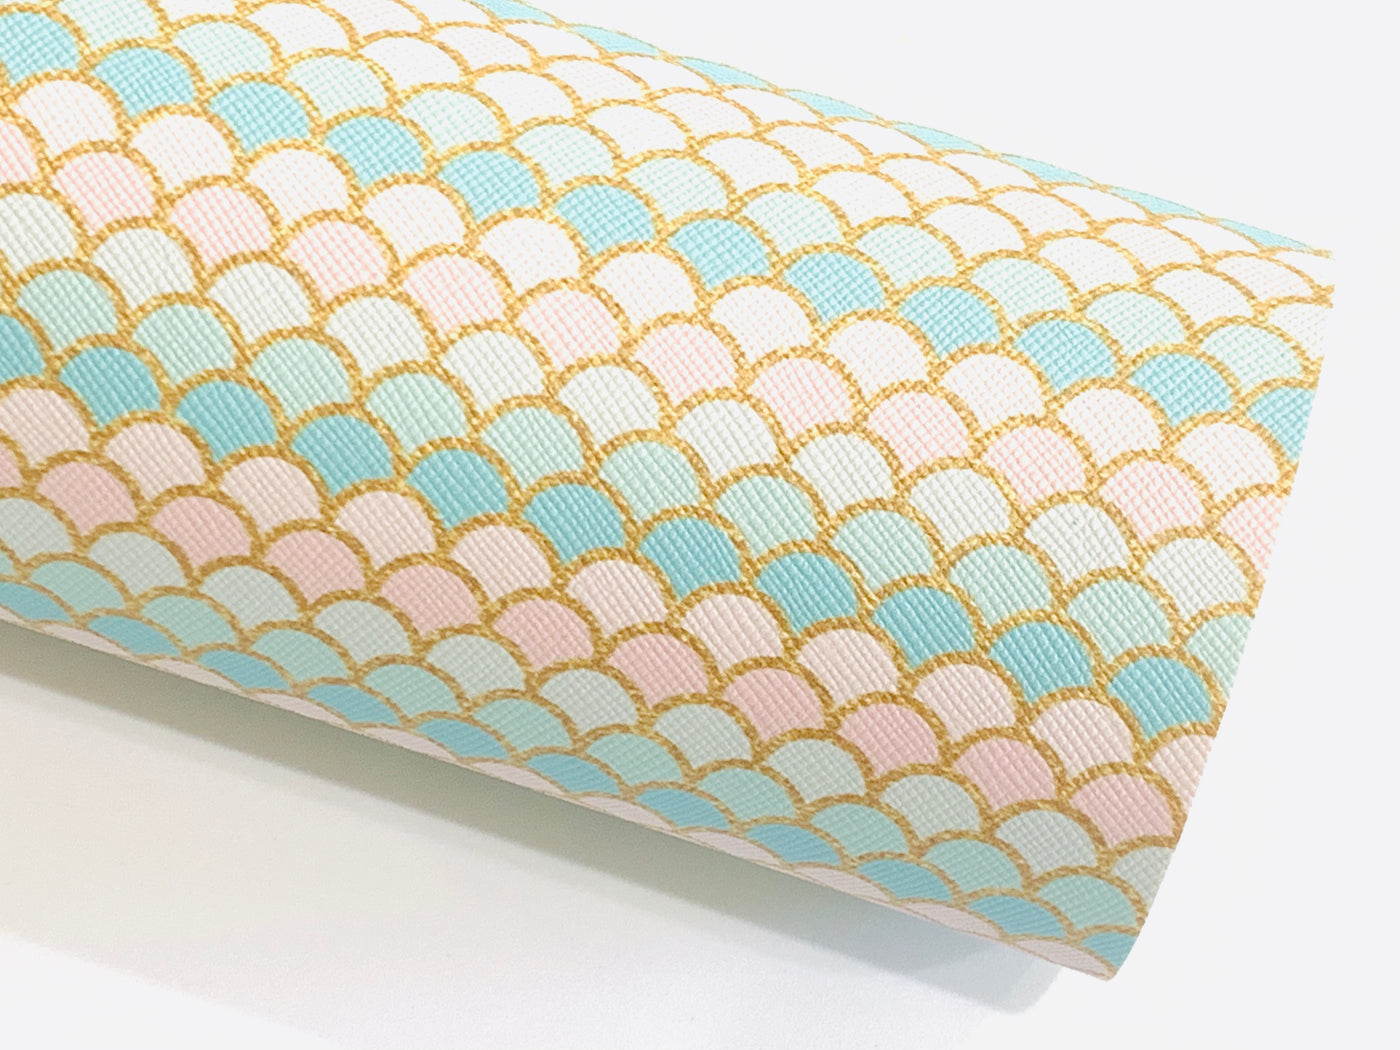 Mermaid Scales A4 Leatherette Sheets